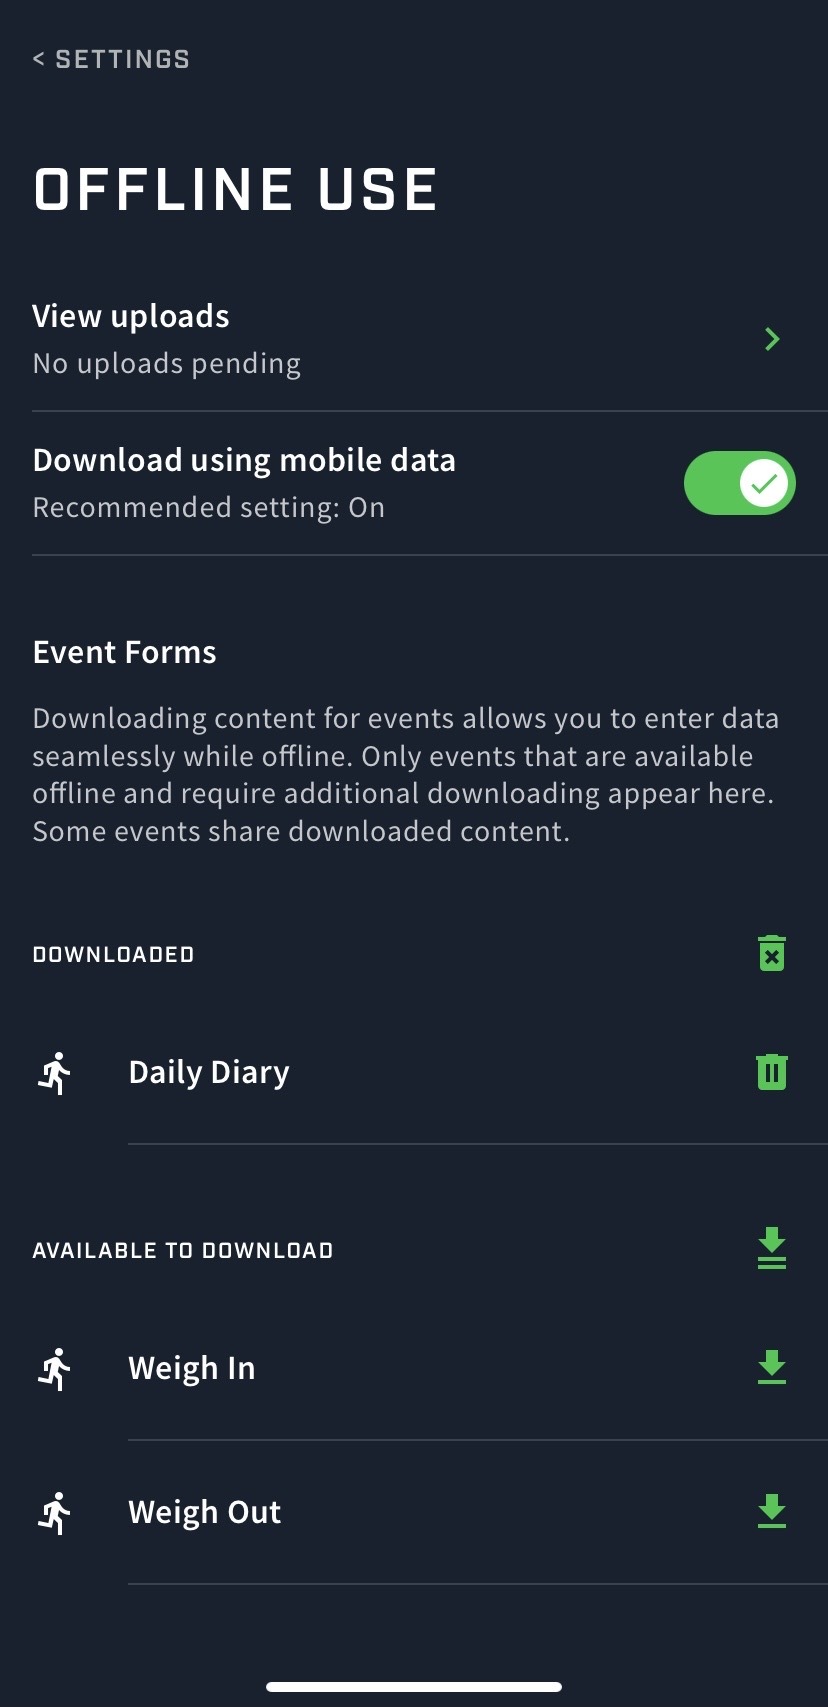 A screenshot of the Offline use settings on the Athlete app.